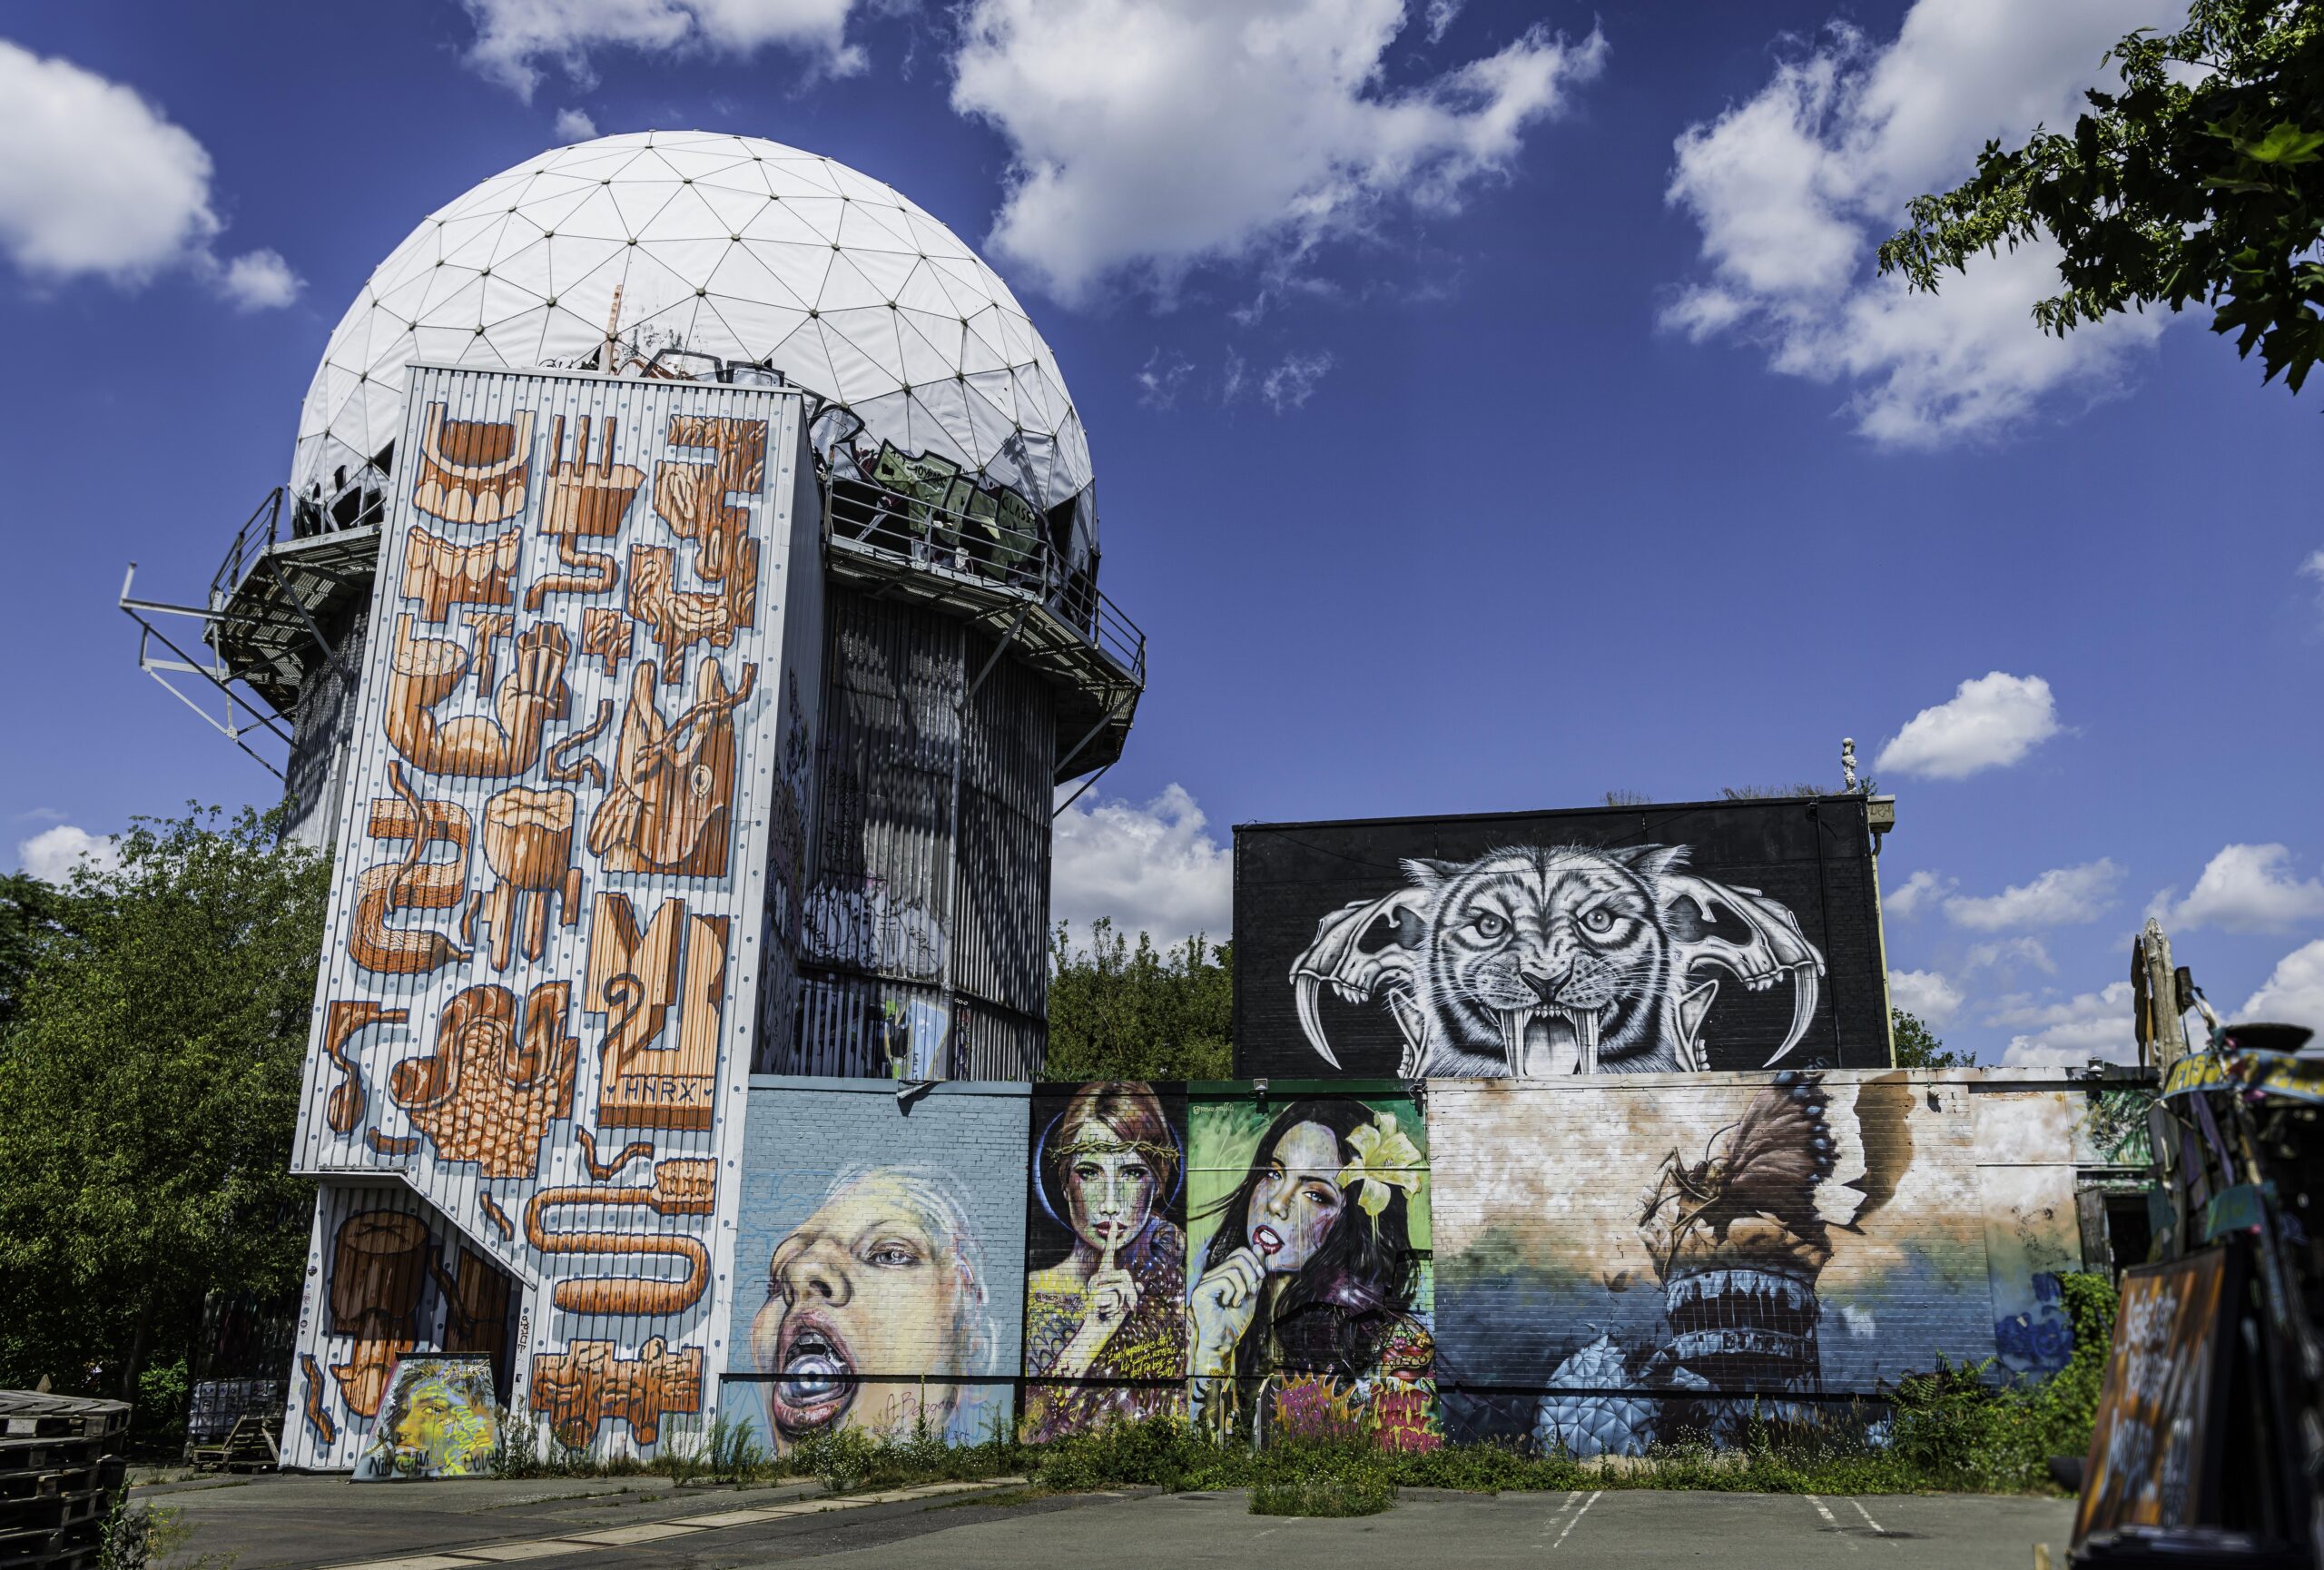 Incredible murals now line the walls of the Cold War listening station